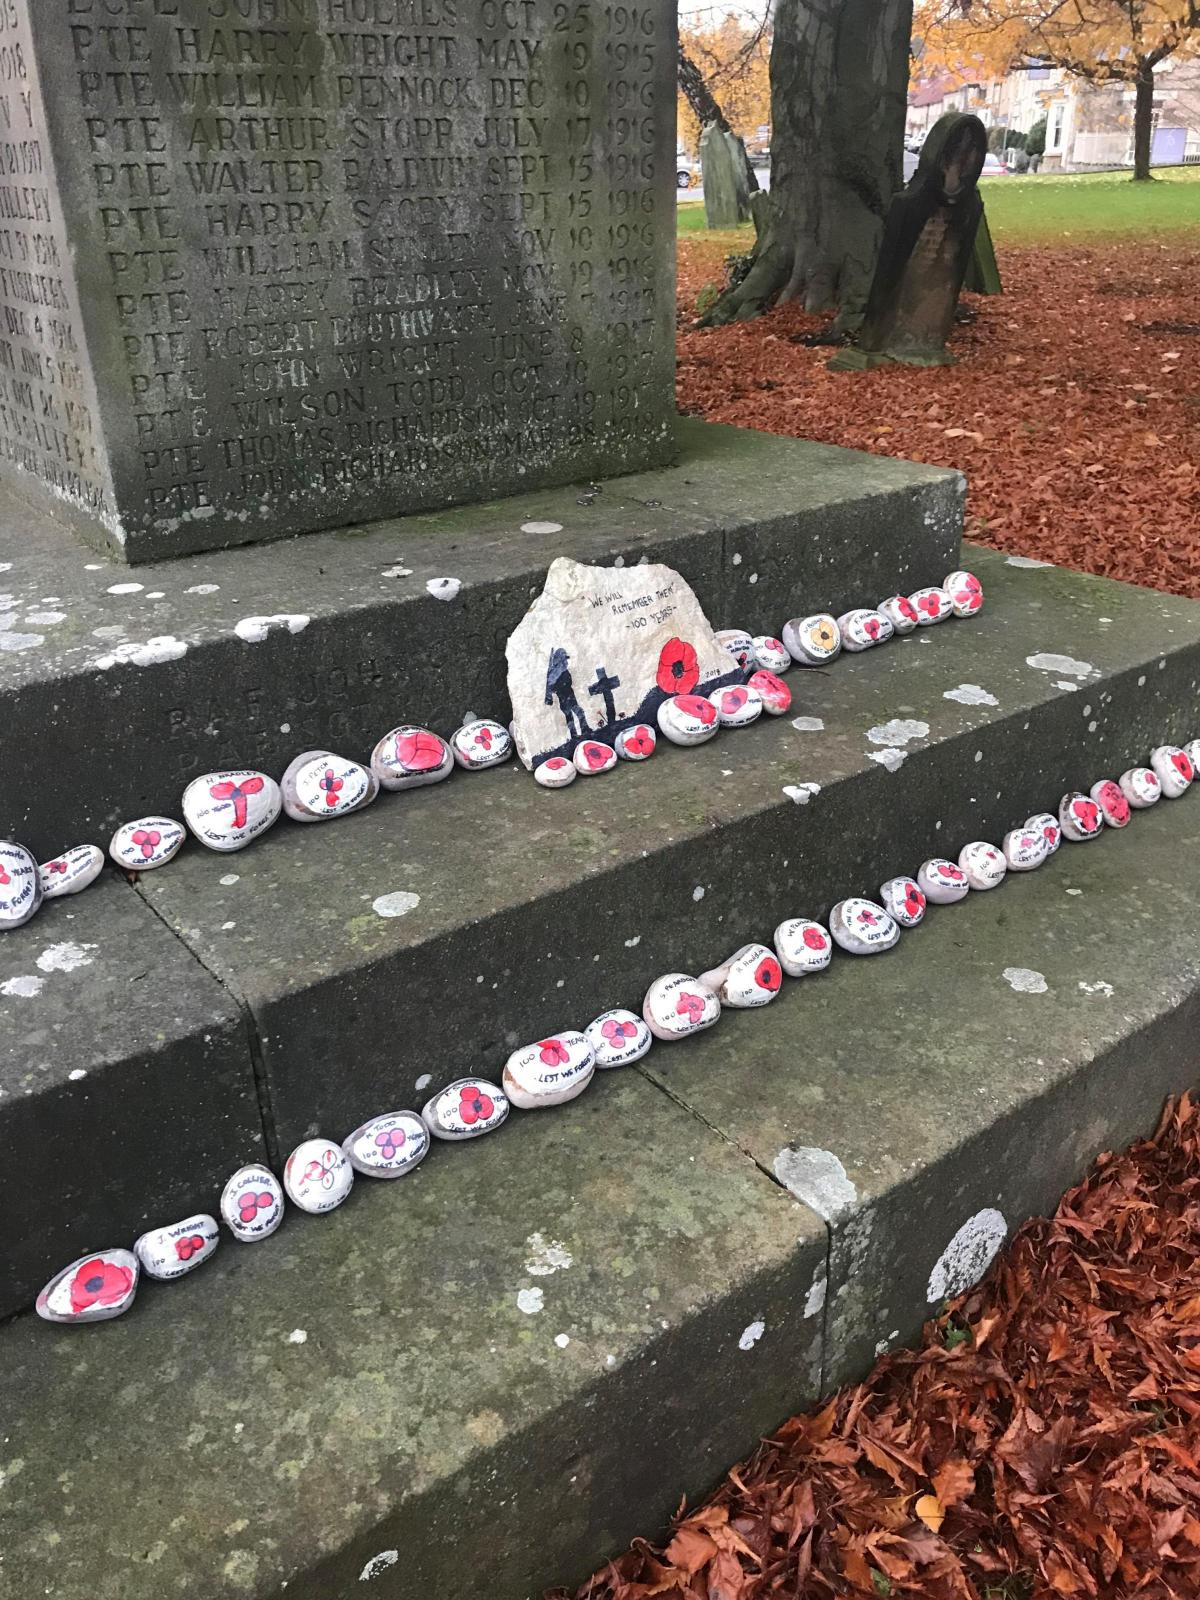 1st Helmsley Beaver: 
Painted Poppy rocks with names of fallen soldiers from the remembrance wall on them.